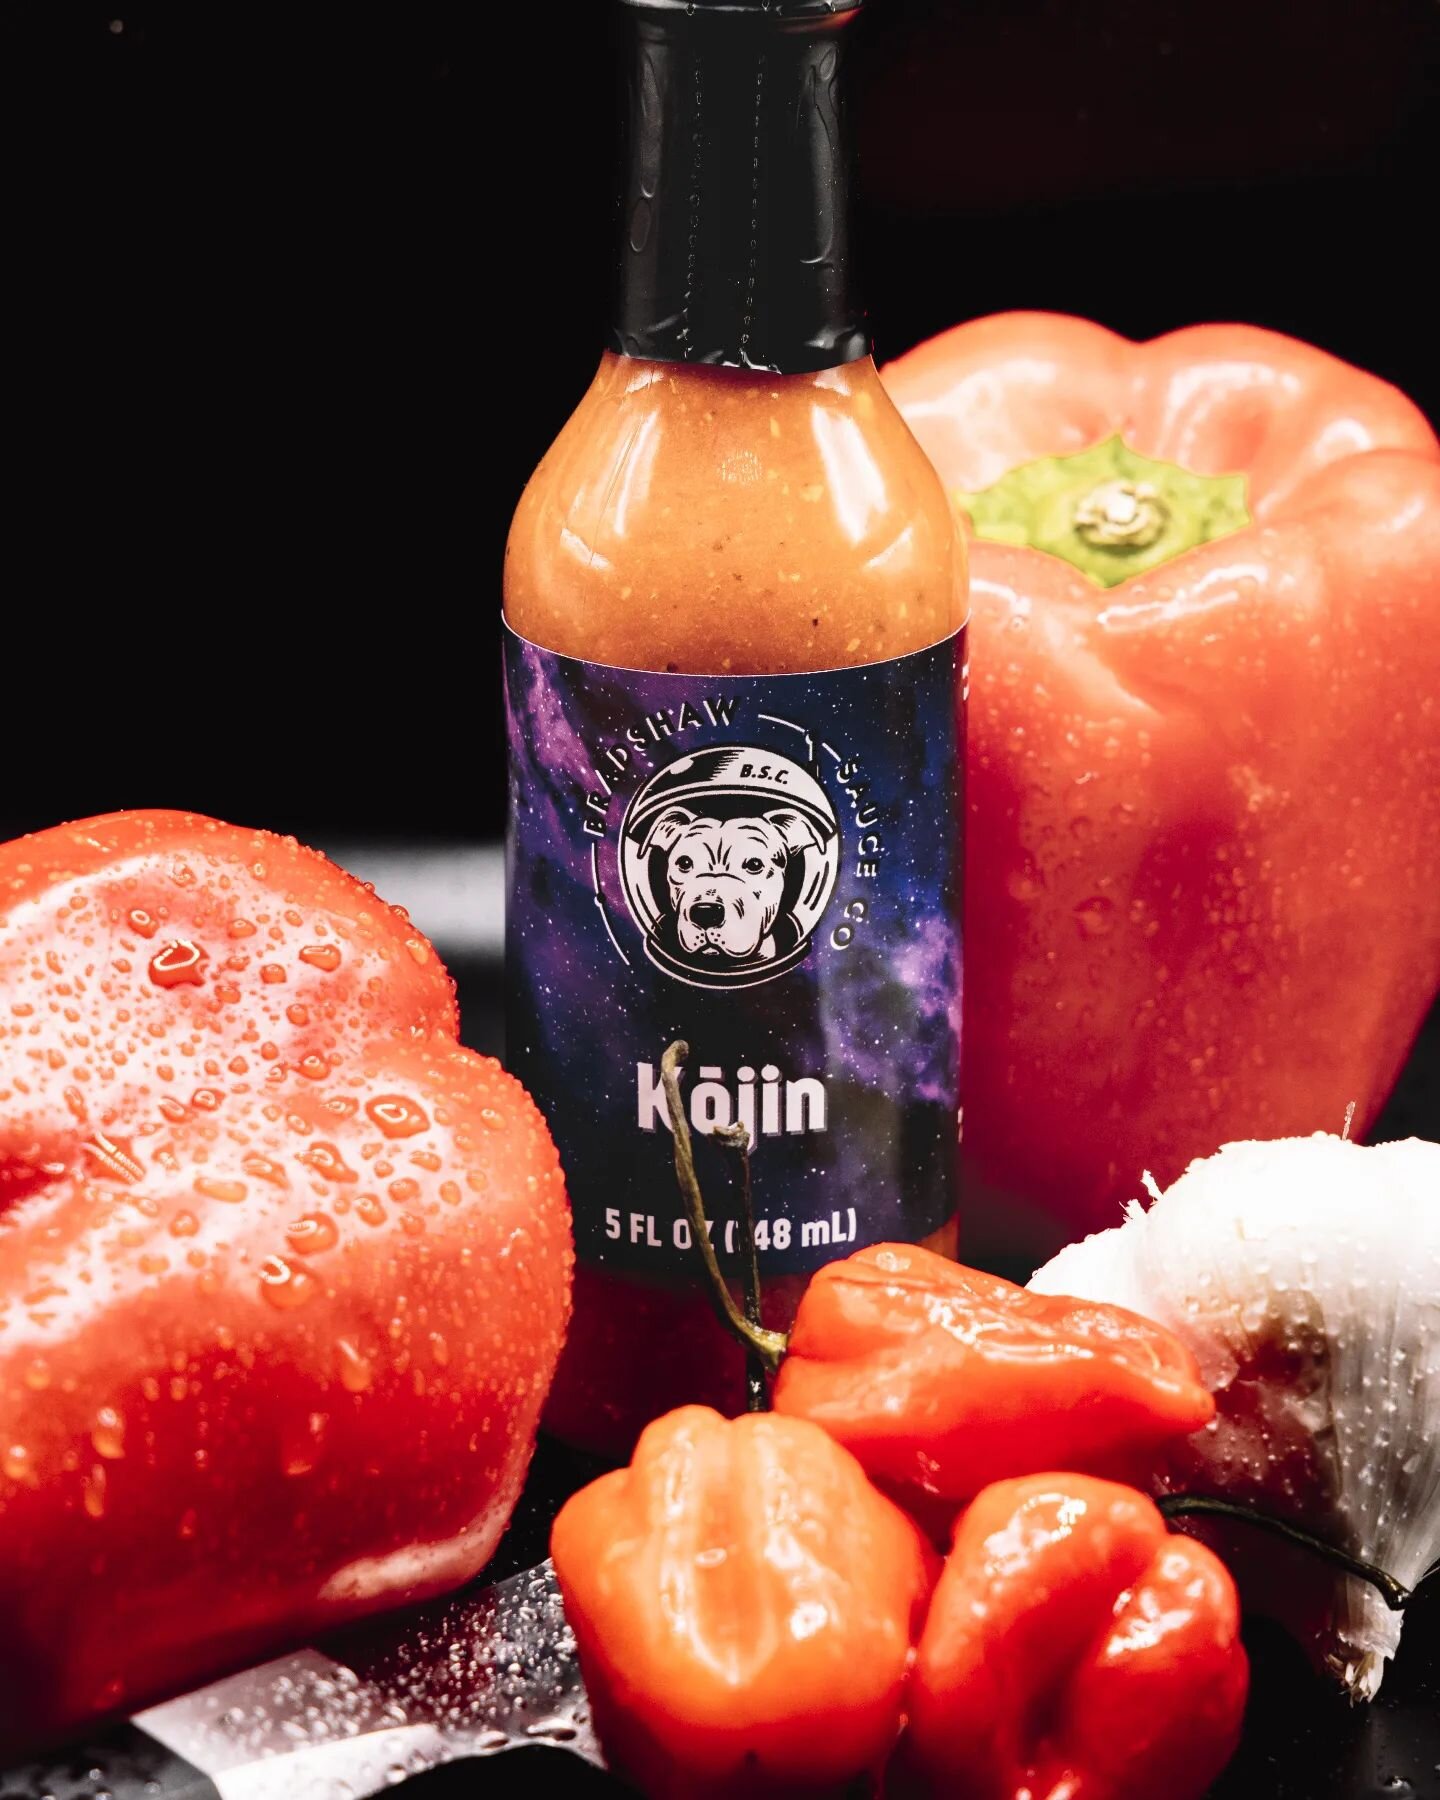 💥 Restocked: Kōjin 💥 Named for the Japanese God of fire and the kitchen, this sauce was once the hottest offering from Bradshaw Sauce Co. Lighting the fire with an abundance of roasted red savina habaneros paired with roasted garlic and cumin, this